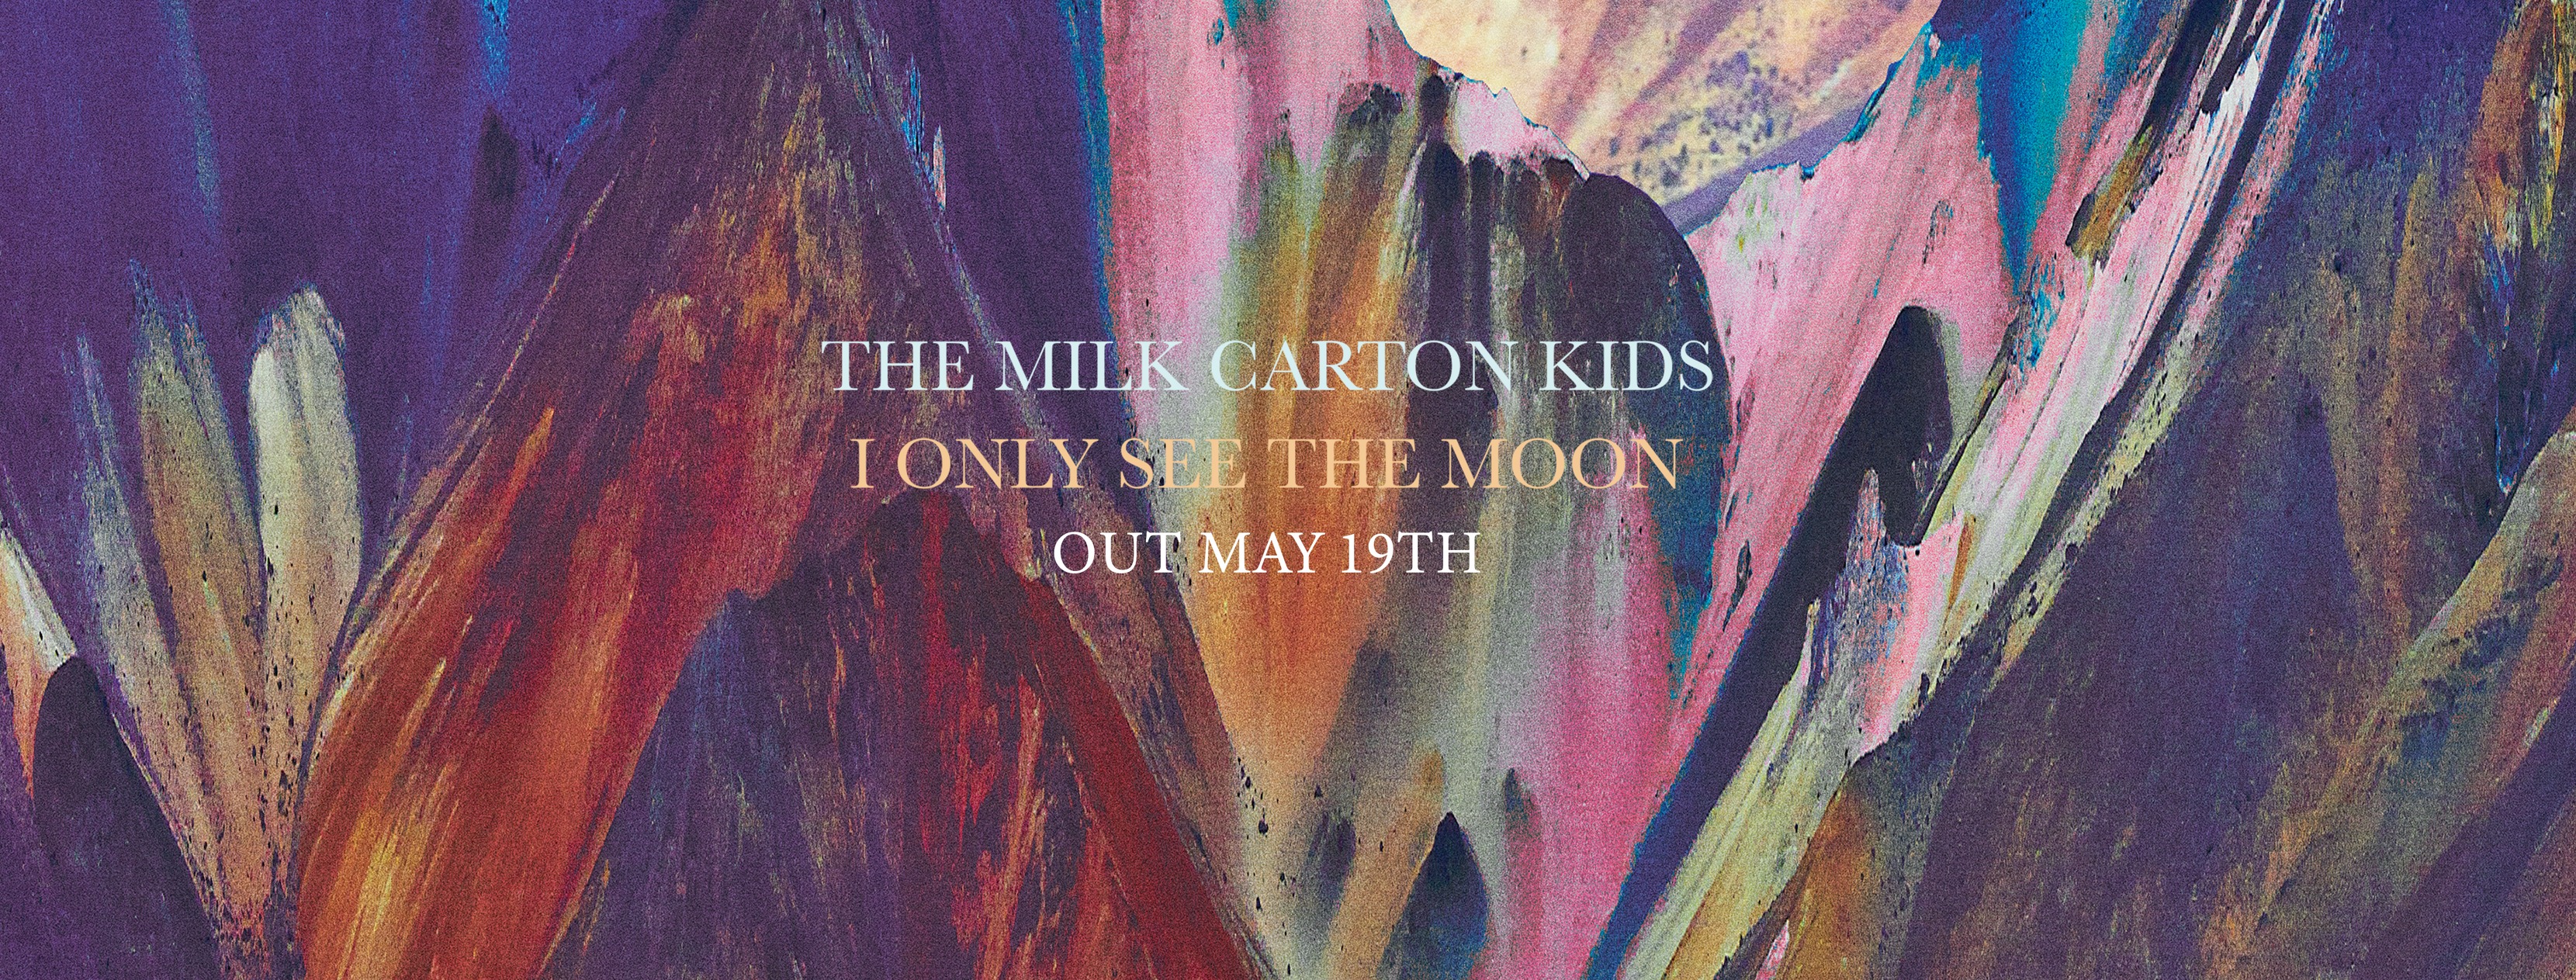 The Milk Carton Kids debut new track "Star Shine;" new record "I Only See The Moon" out May 19